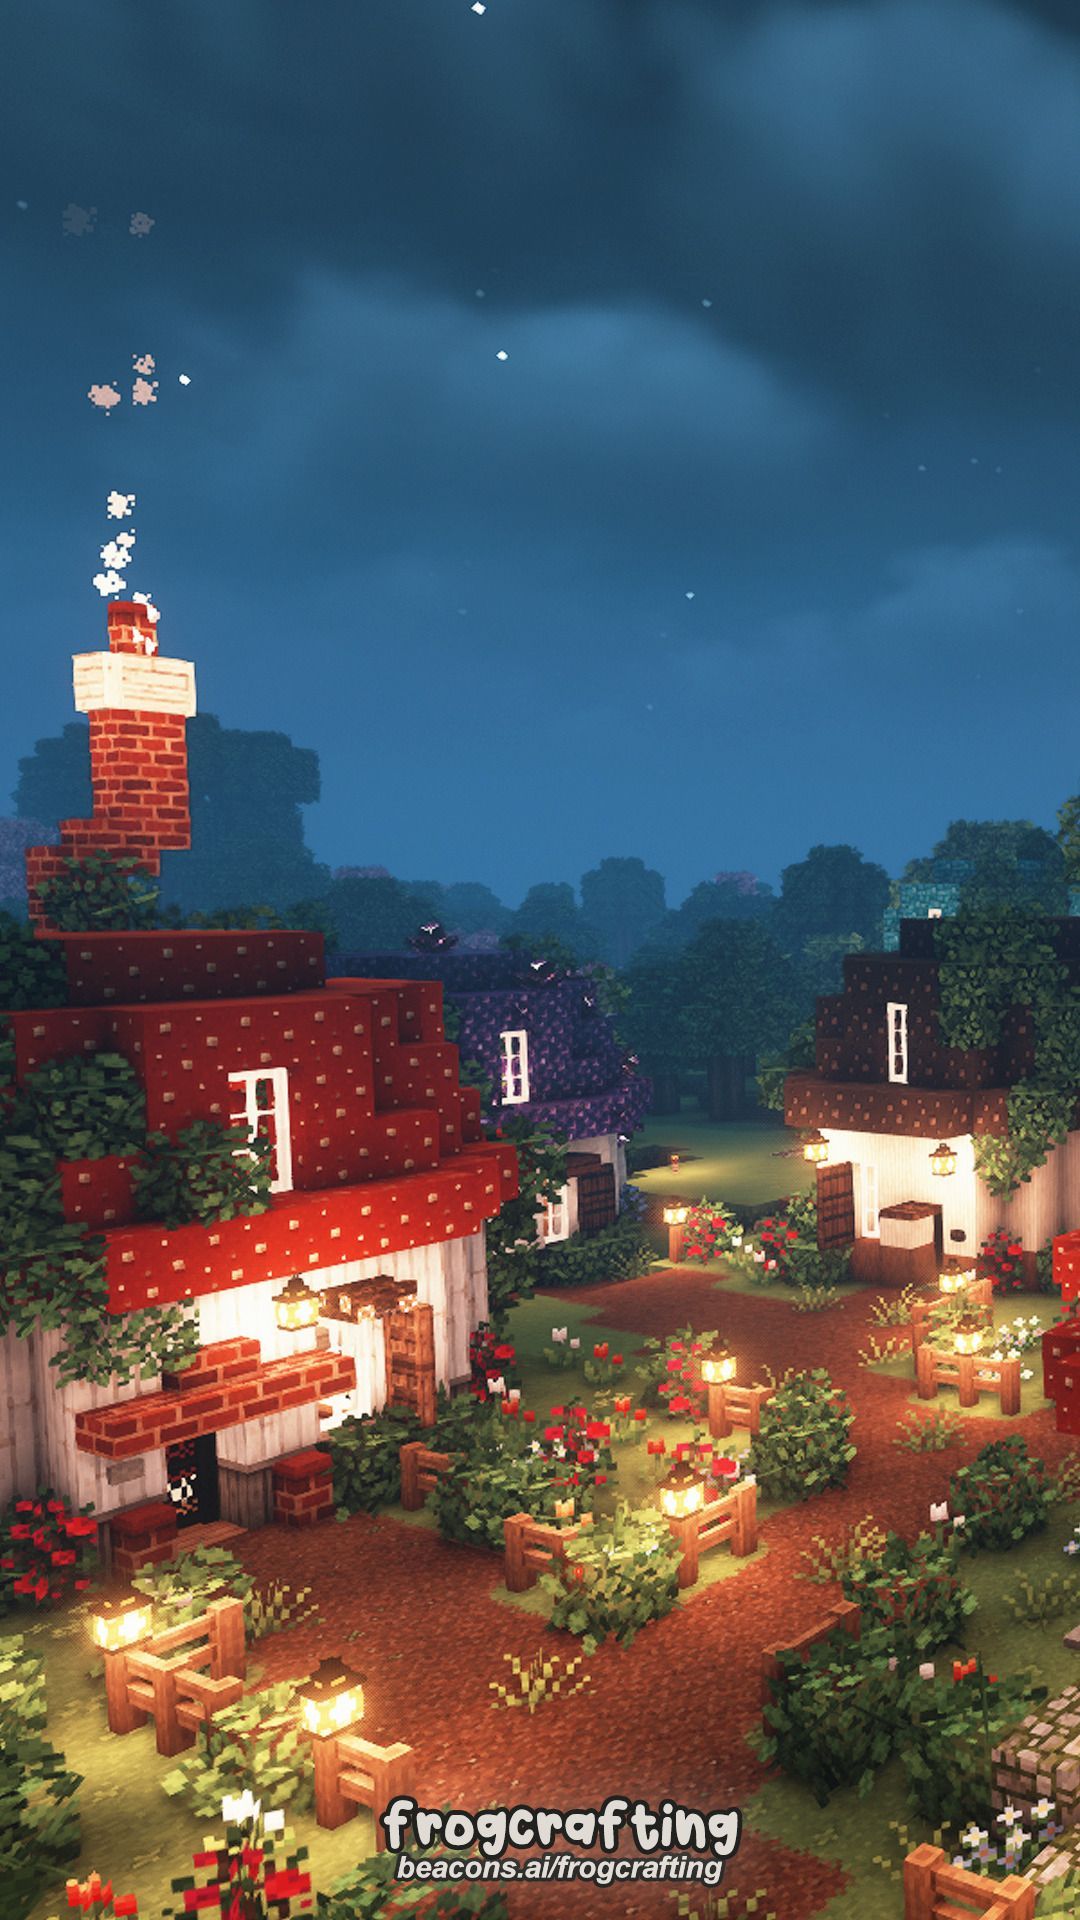 Minecraft houses in the night wallpaper - Minecraft